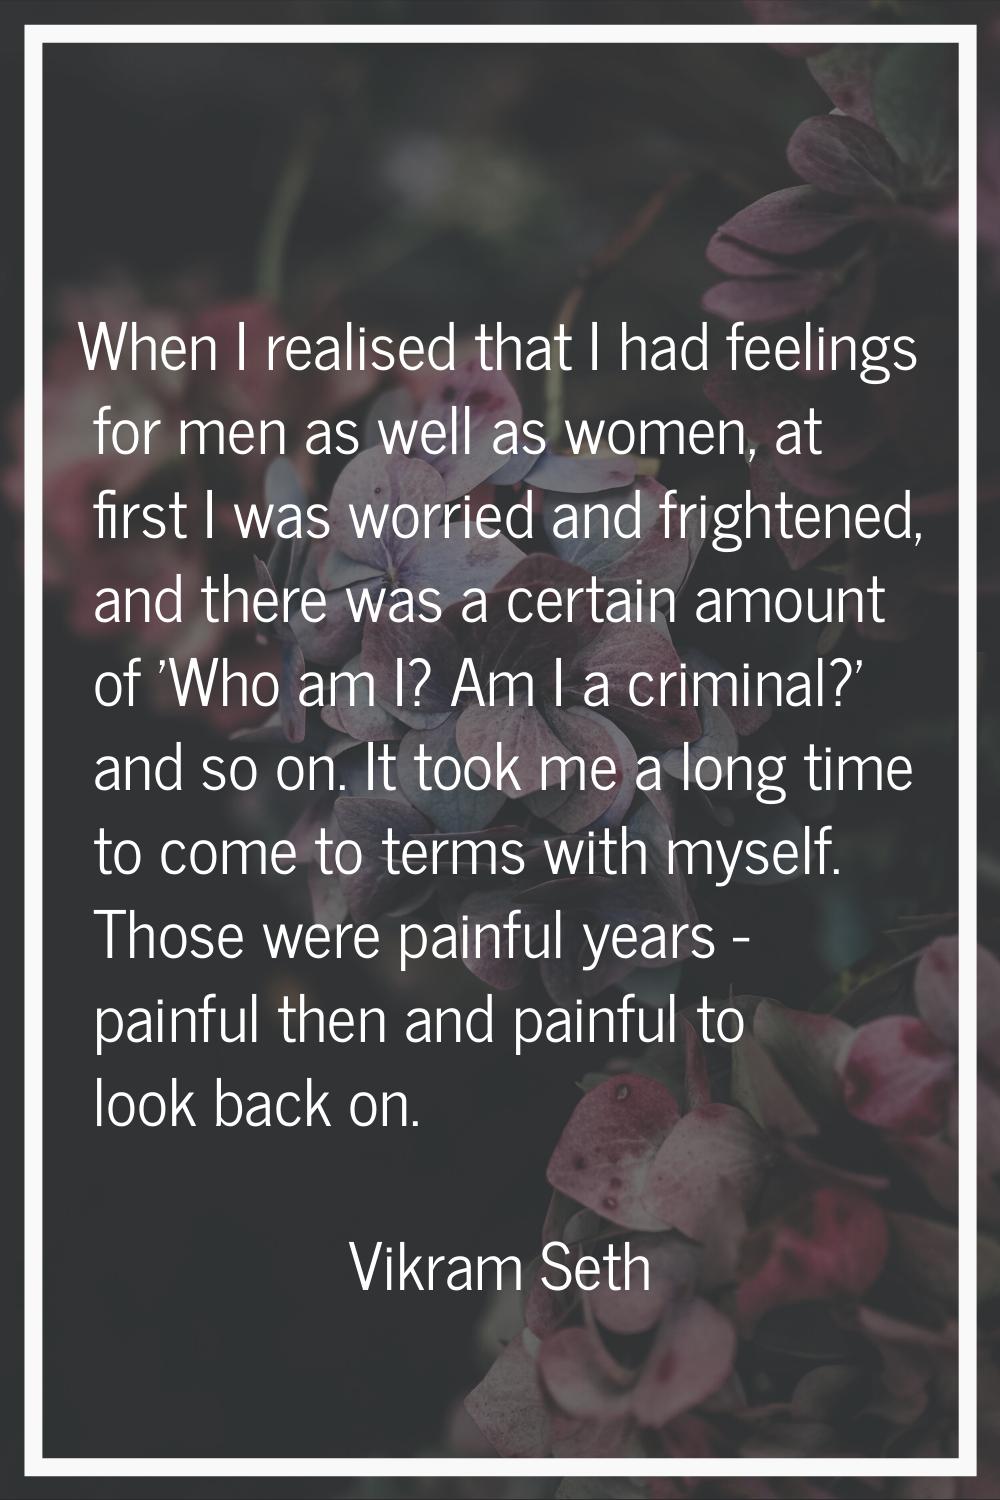 When I realised that I had feelings for men as well as women, at first I was worried and frightened